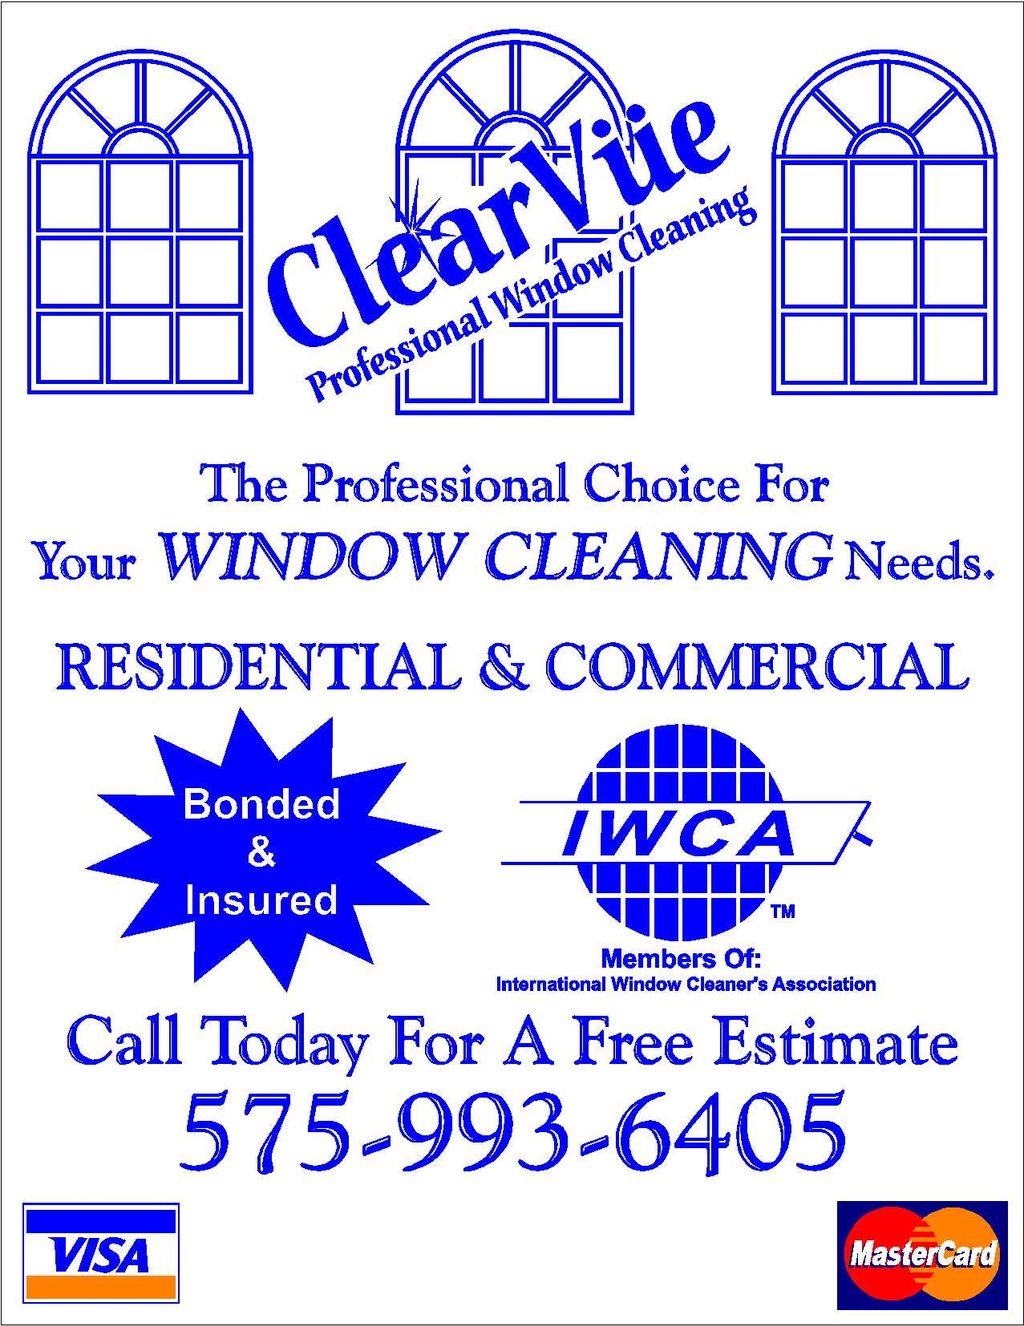 ClearVue Professional Window Cleaning, LLC